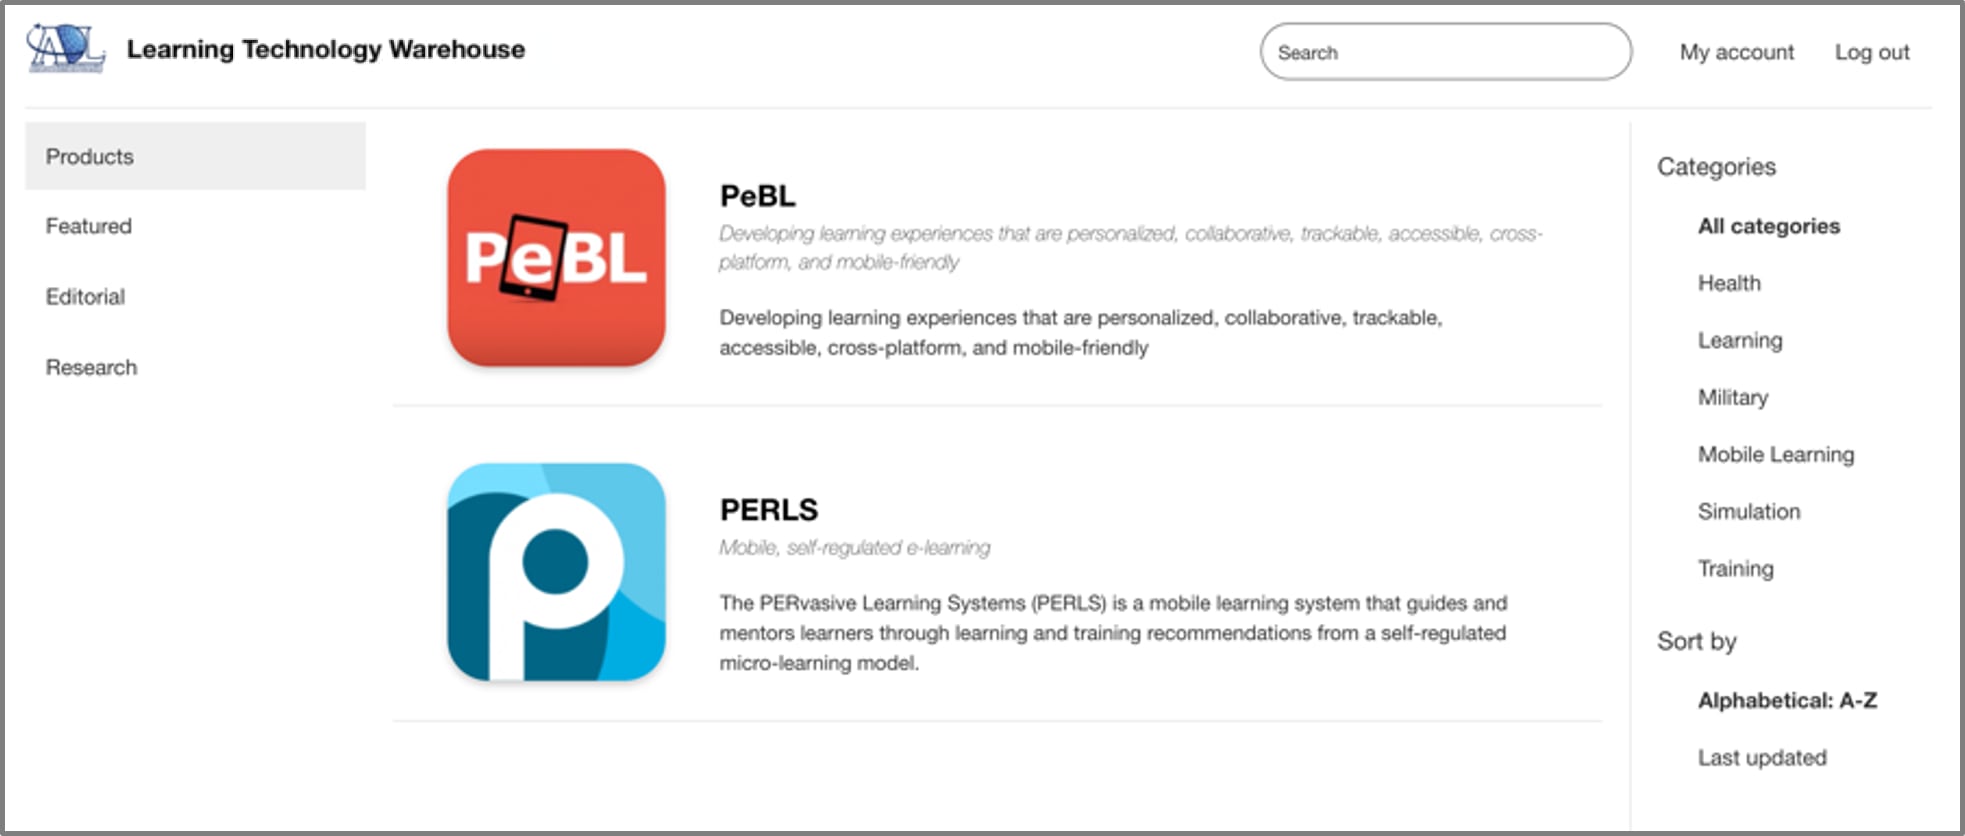 Screenshot of Learning Technology Warehouse showing PeBL and PERLS products